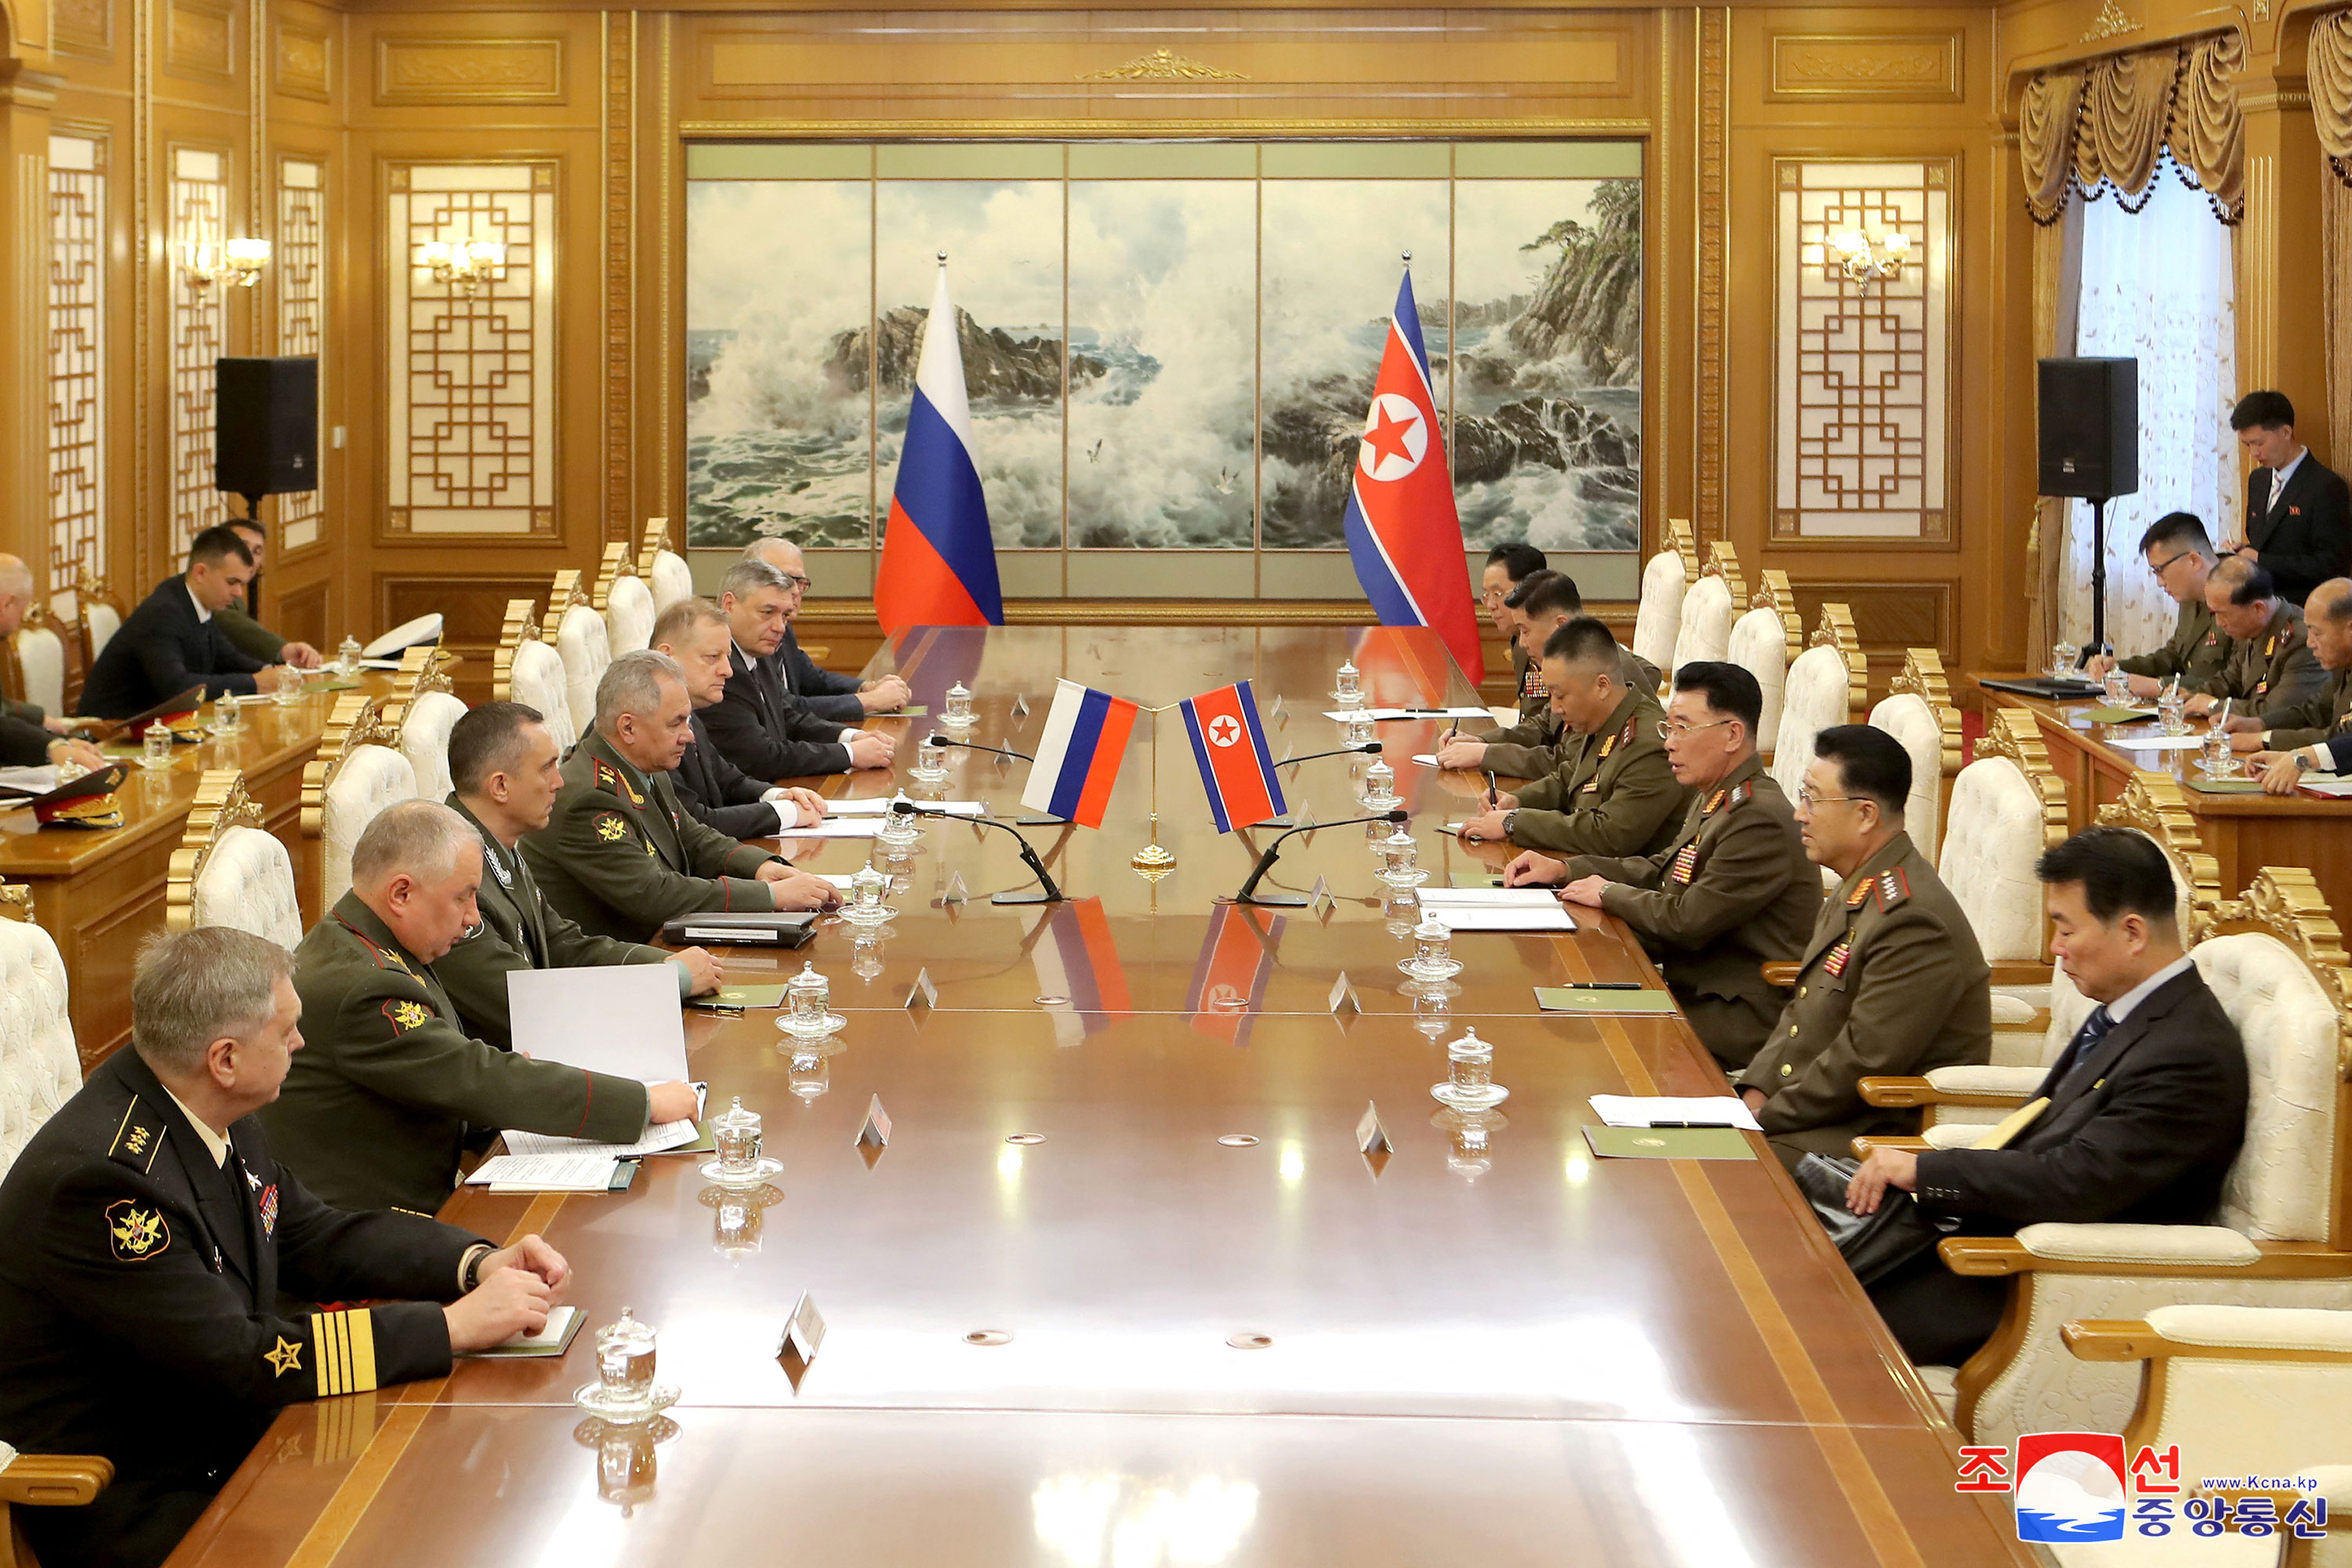 North Korean Defence Minister Kang Sun Nam meets with Russian Defense Minister Sergei Shoigu in this image released by North Korea's Korean Central News Agency on July 27. 